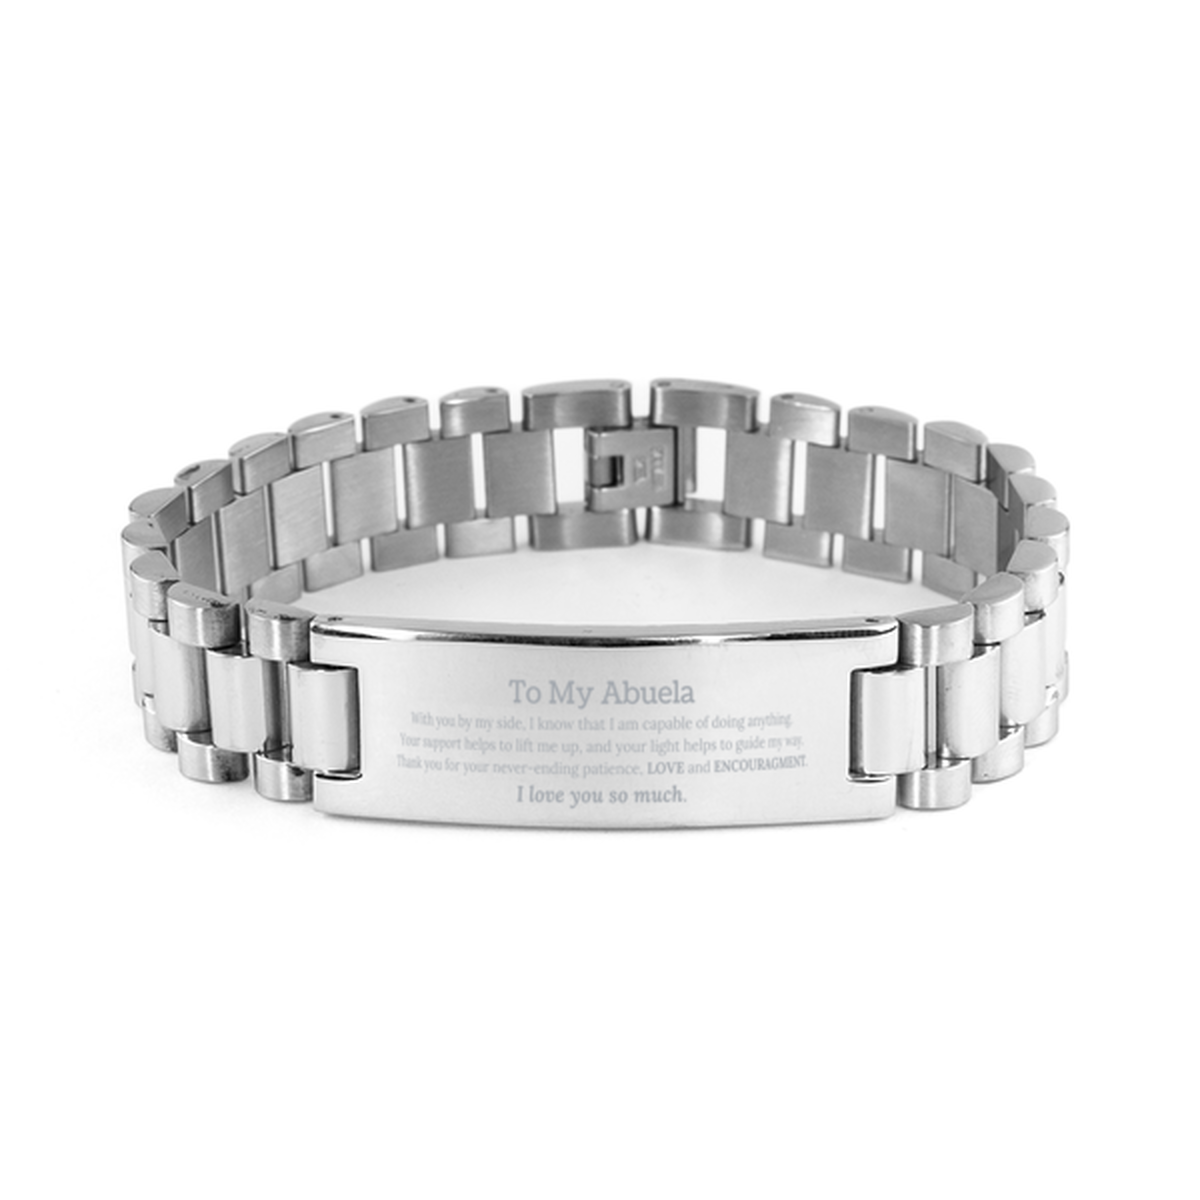 Appreciation Abuela Ladder Stainless Steel Bracelet Gifts, To My Abuela Birthday Christmas Wedding Keepsake Gifts for Abuela With you by my side, I know that I am capable of doing anything. I love you so much